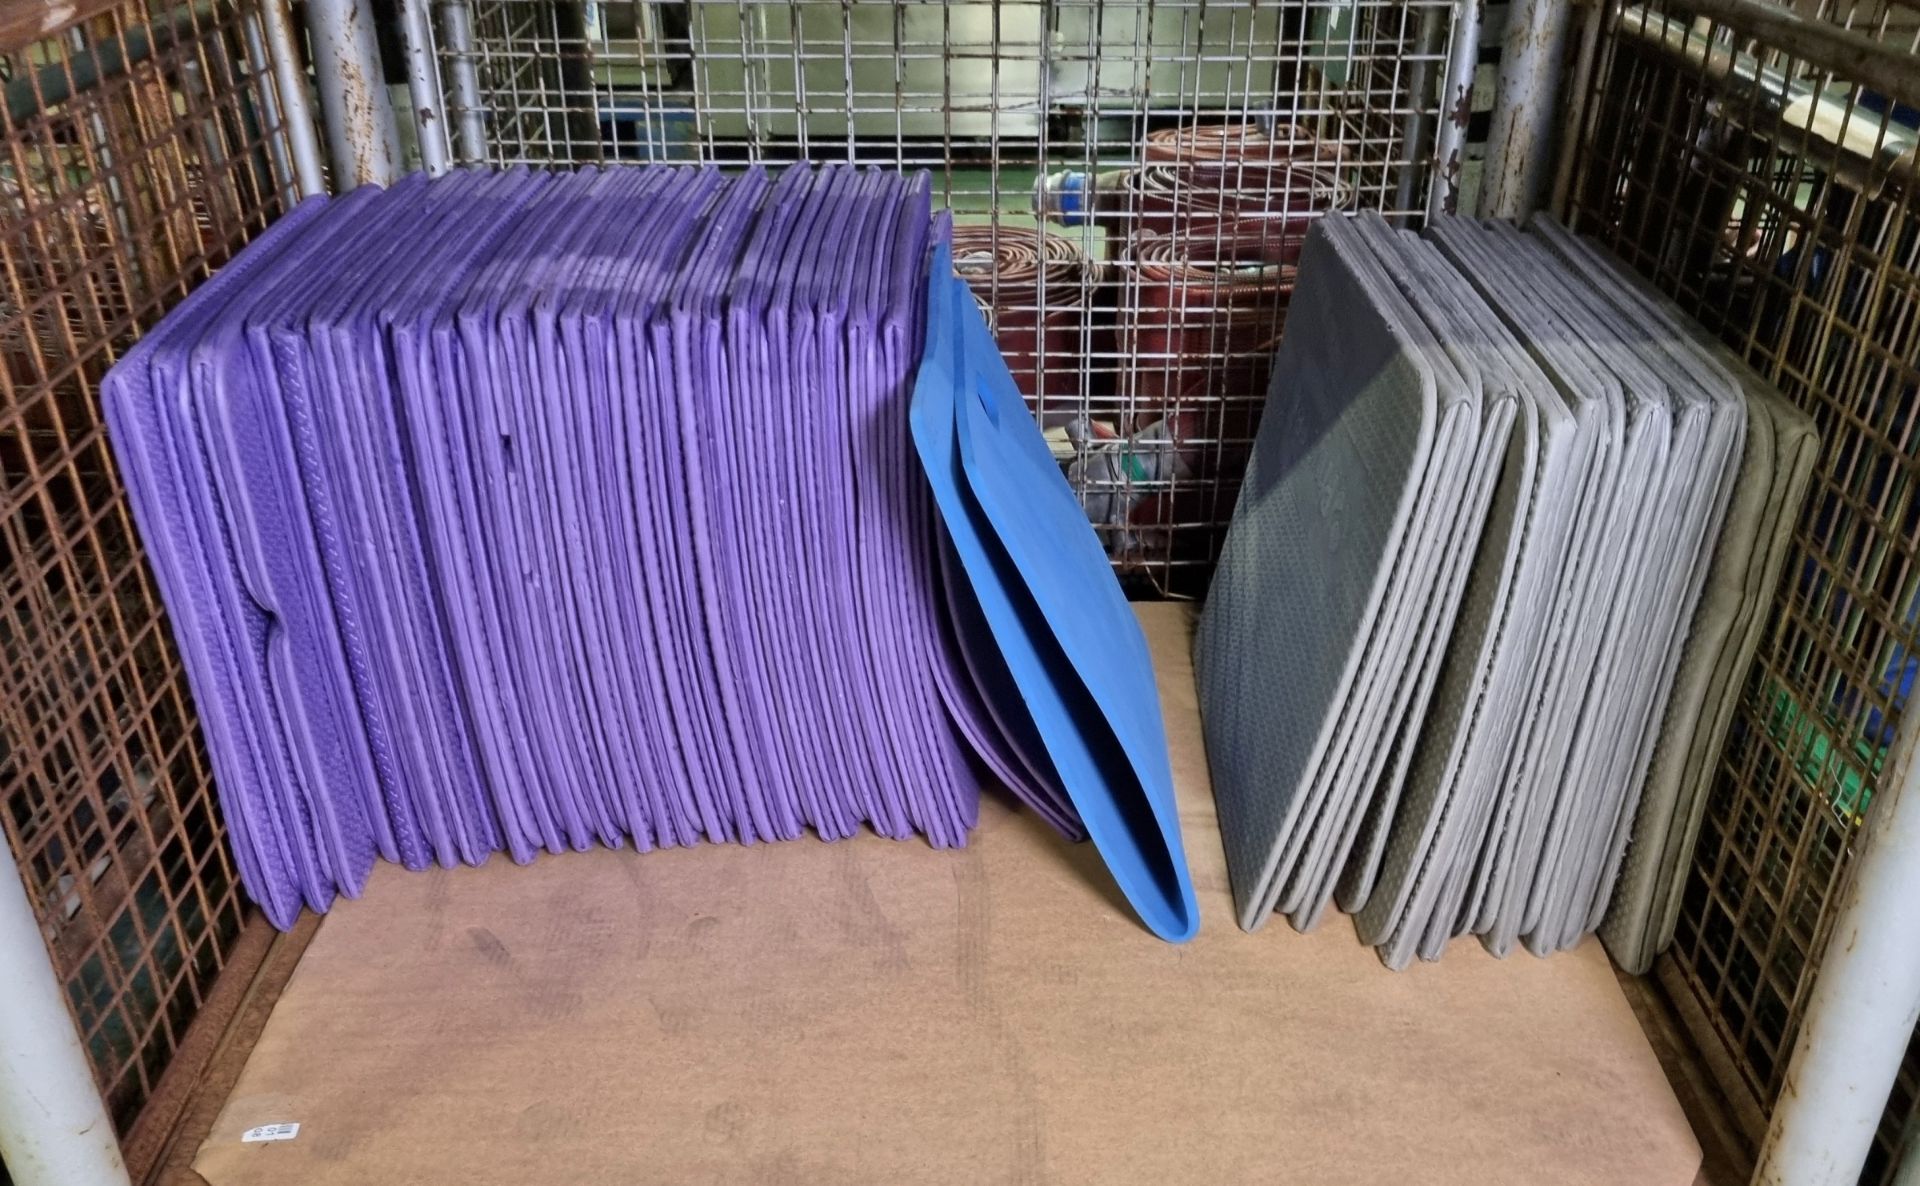 35x folding yoga mats, 17x roll-up yoga mats mixed colours and lengths - Image 4 of 5